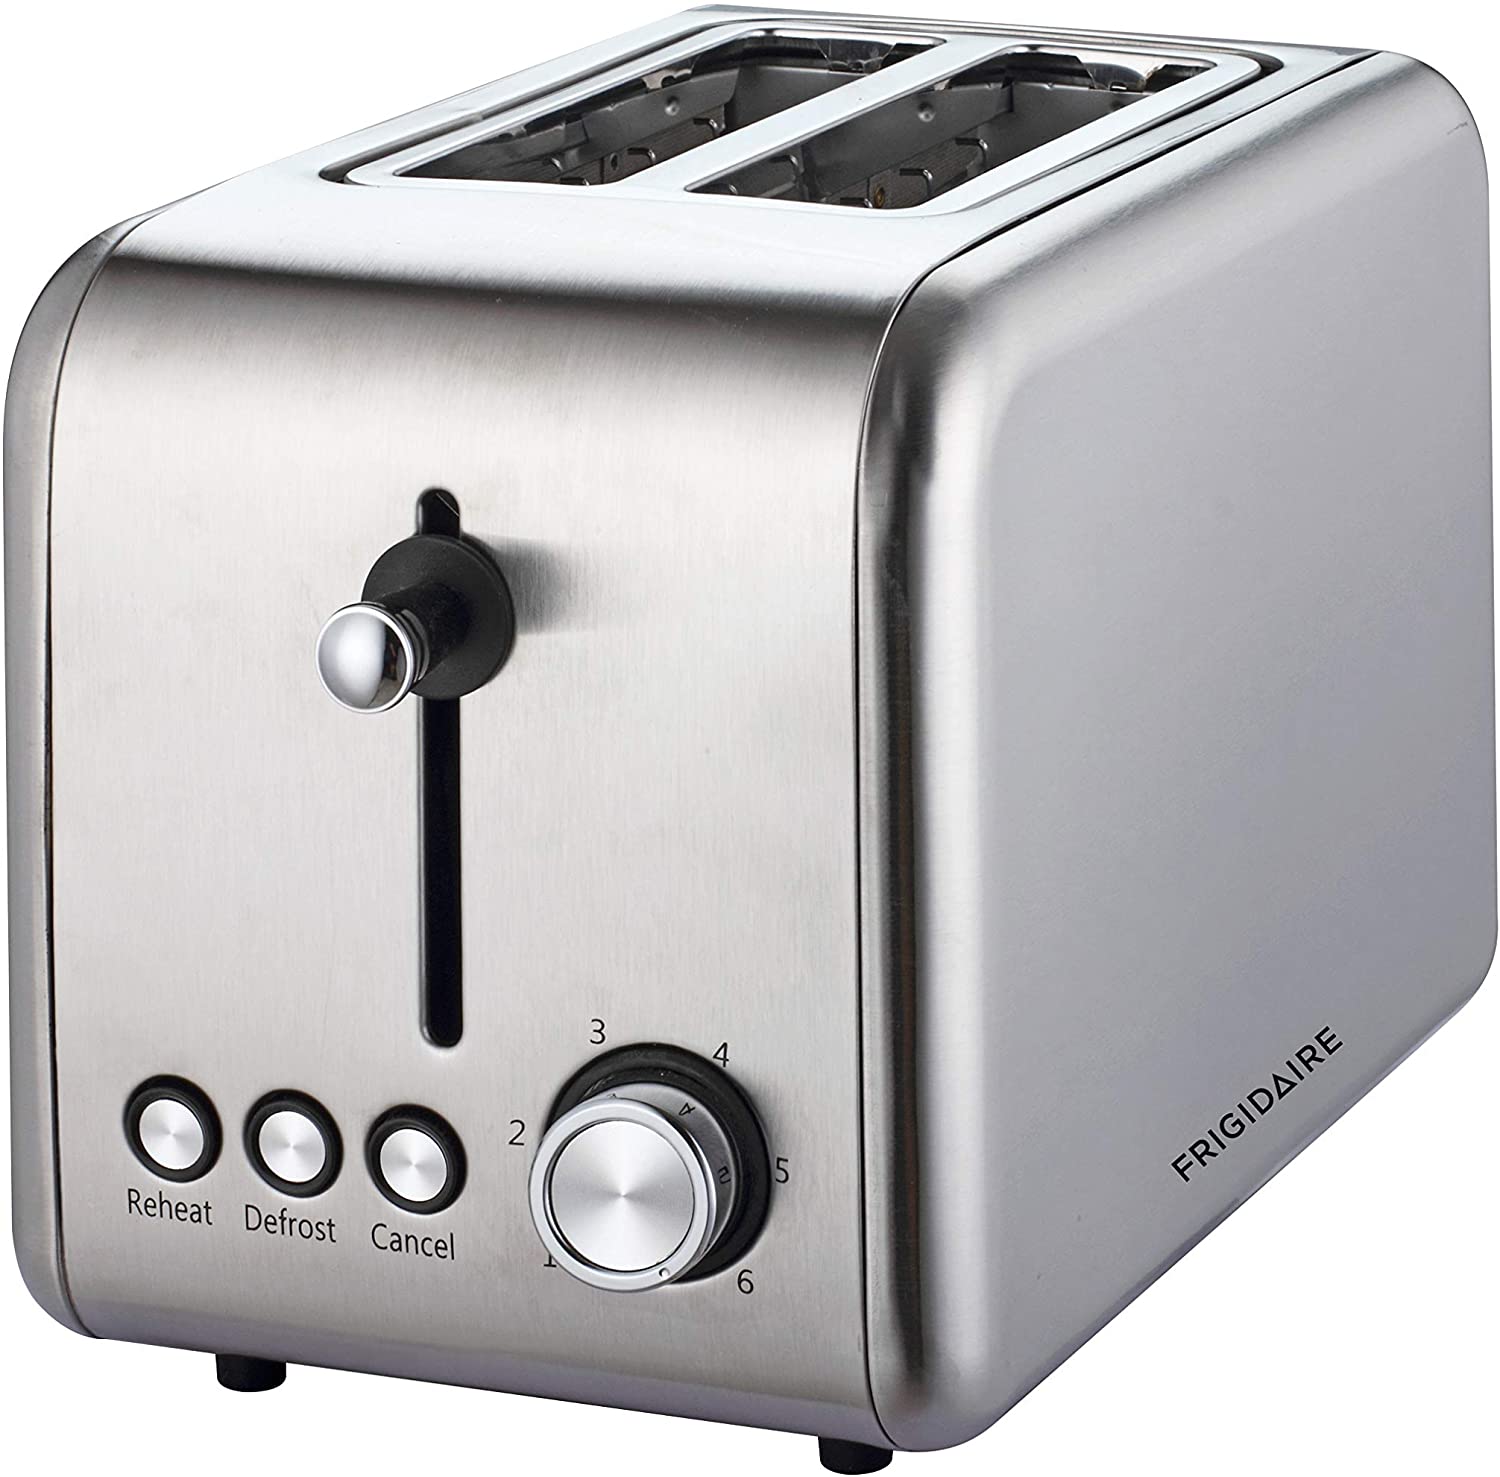 https://www.220stores.com/Shared/Images/Product/Frigidaire-FD3112-220-Volt-2-Slice-Slot-Toaster-Stainless-steel-Removable-Crumb-Tray-Defrost-and-Browning-Functions/fd3112.jpg